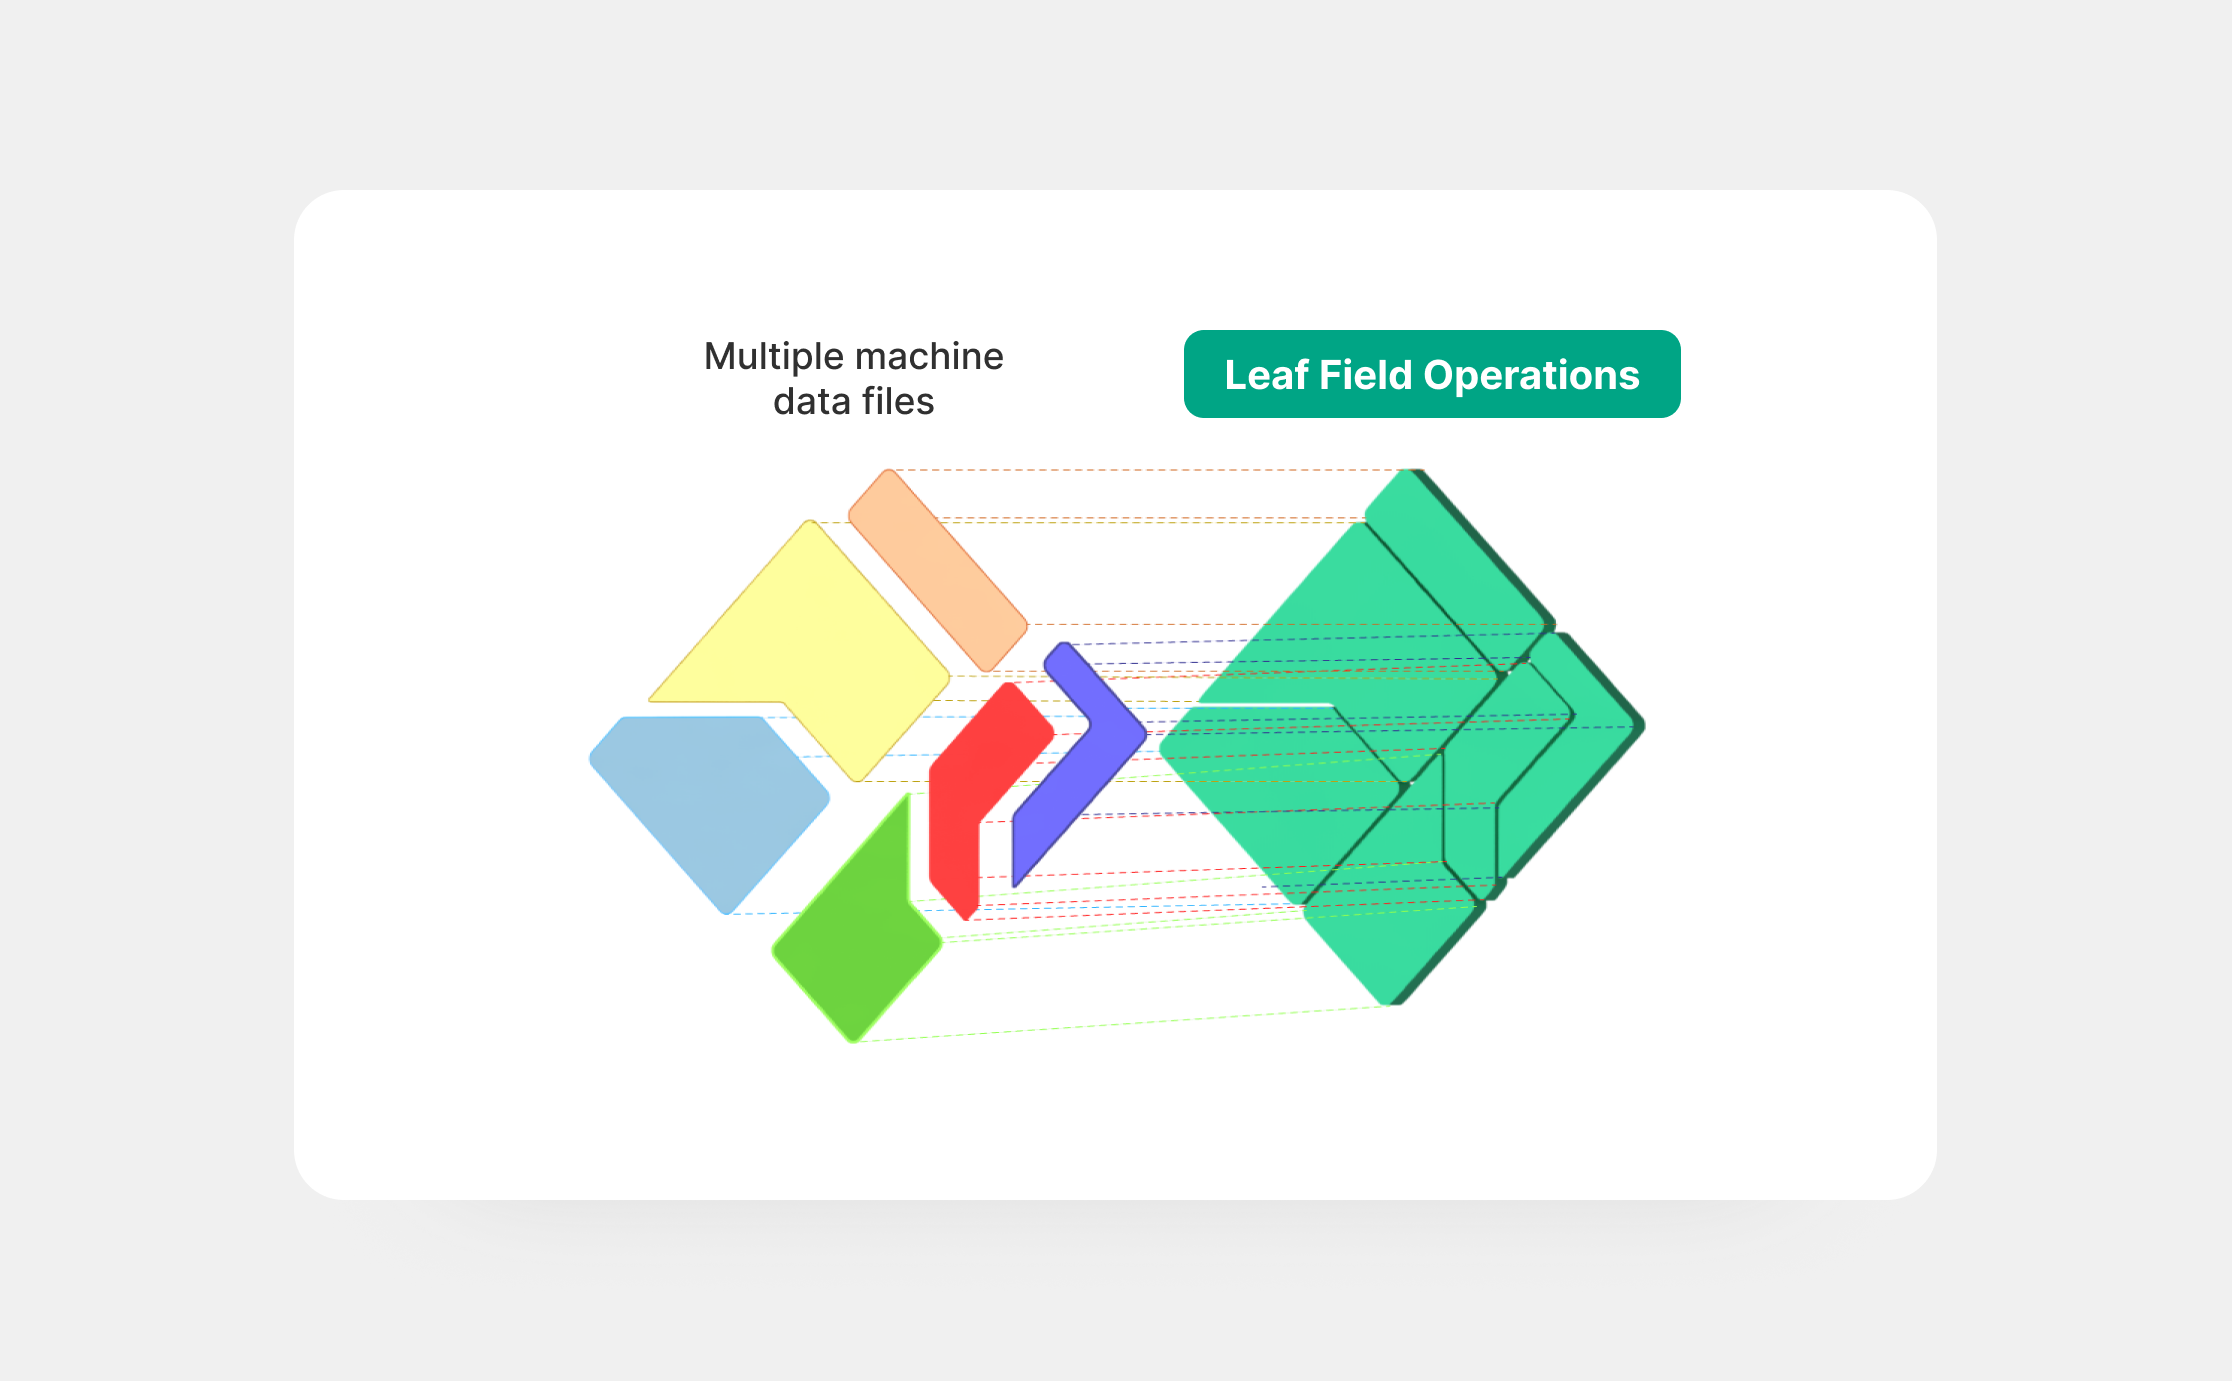 Leaf, data infrastructure for agriculture